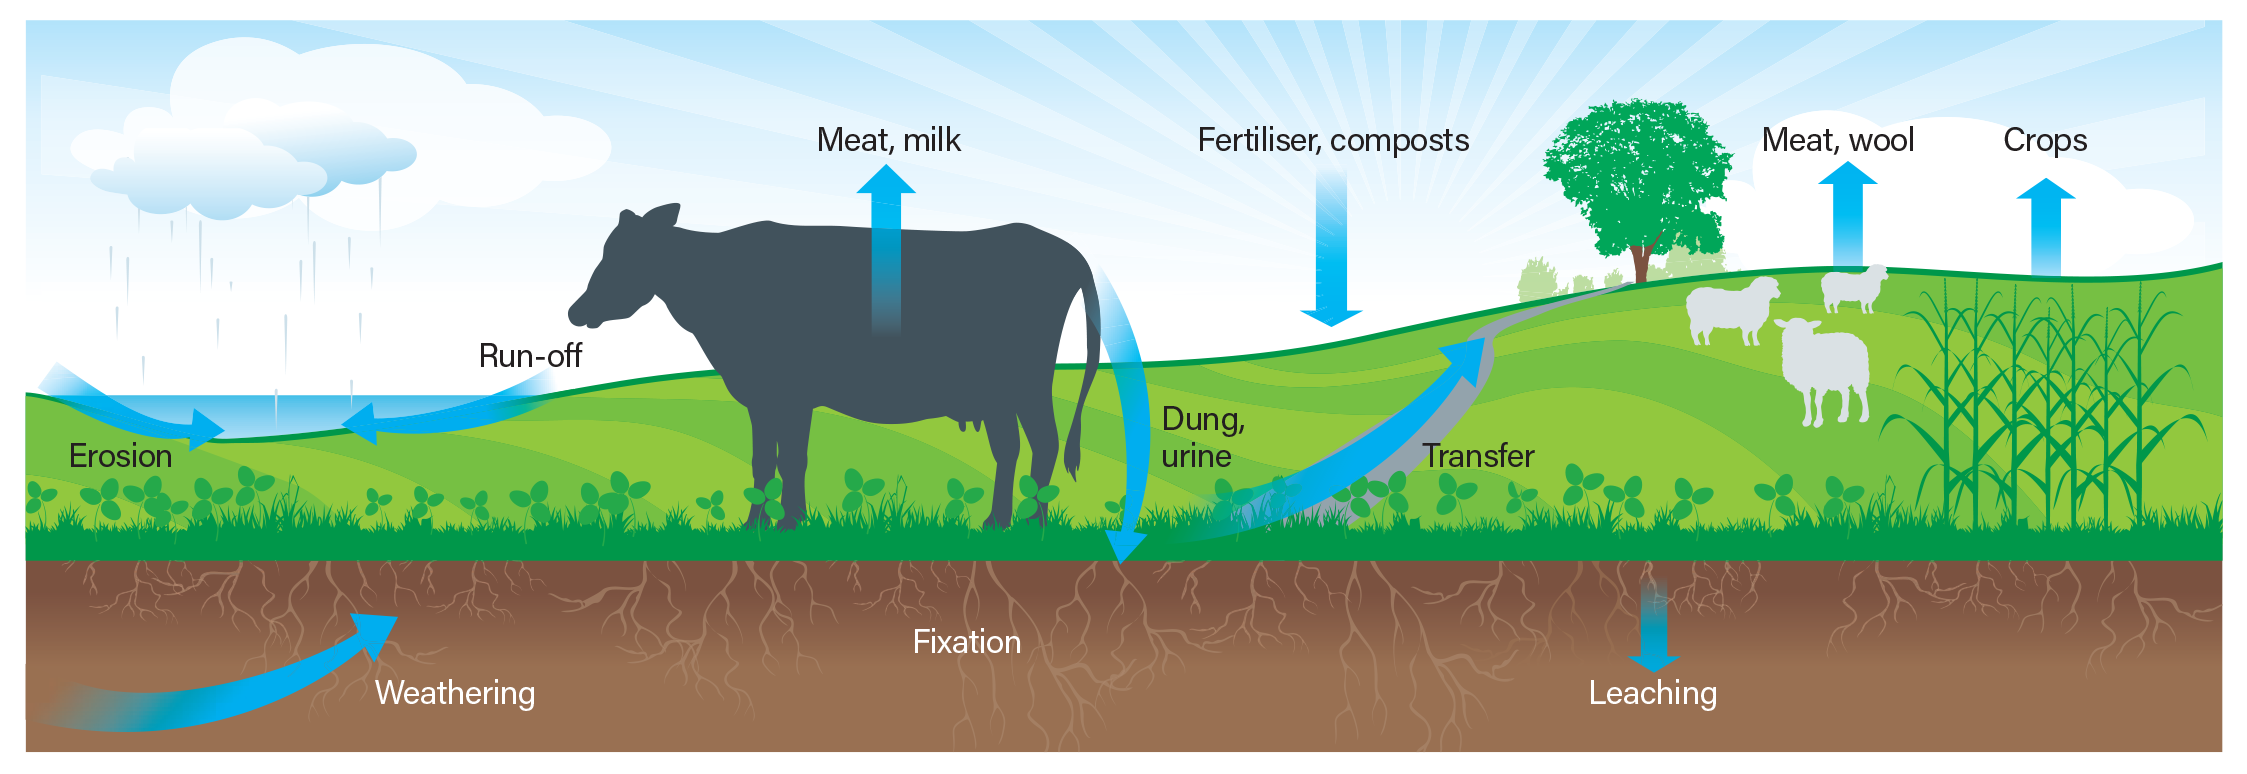 The major features of the phosphorus cycle on a pastoral farm